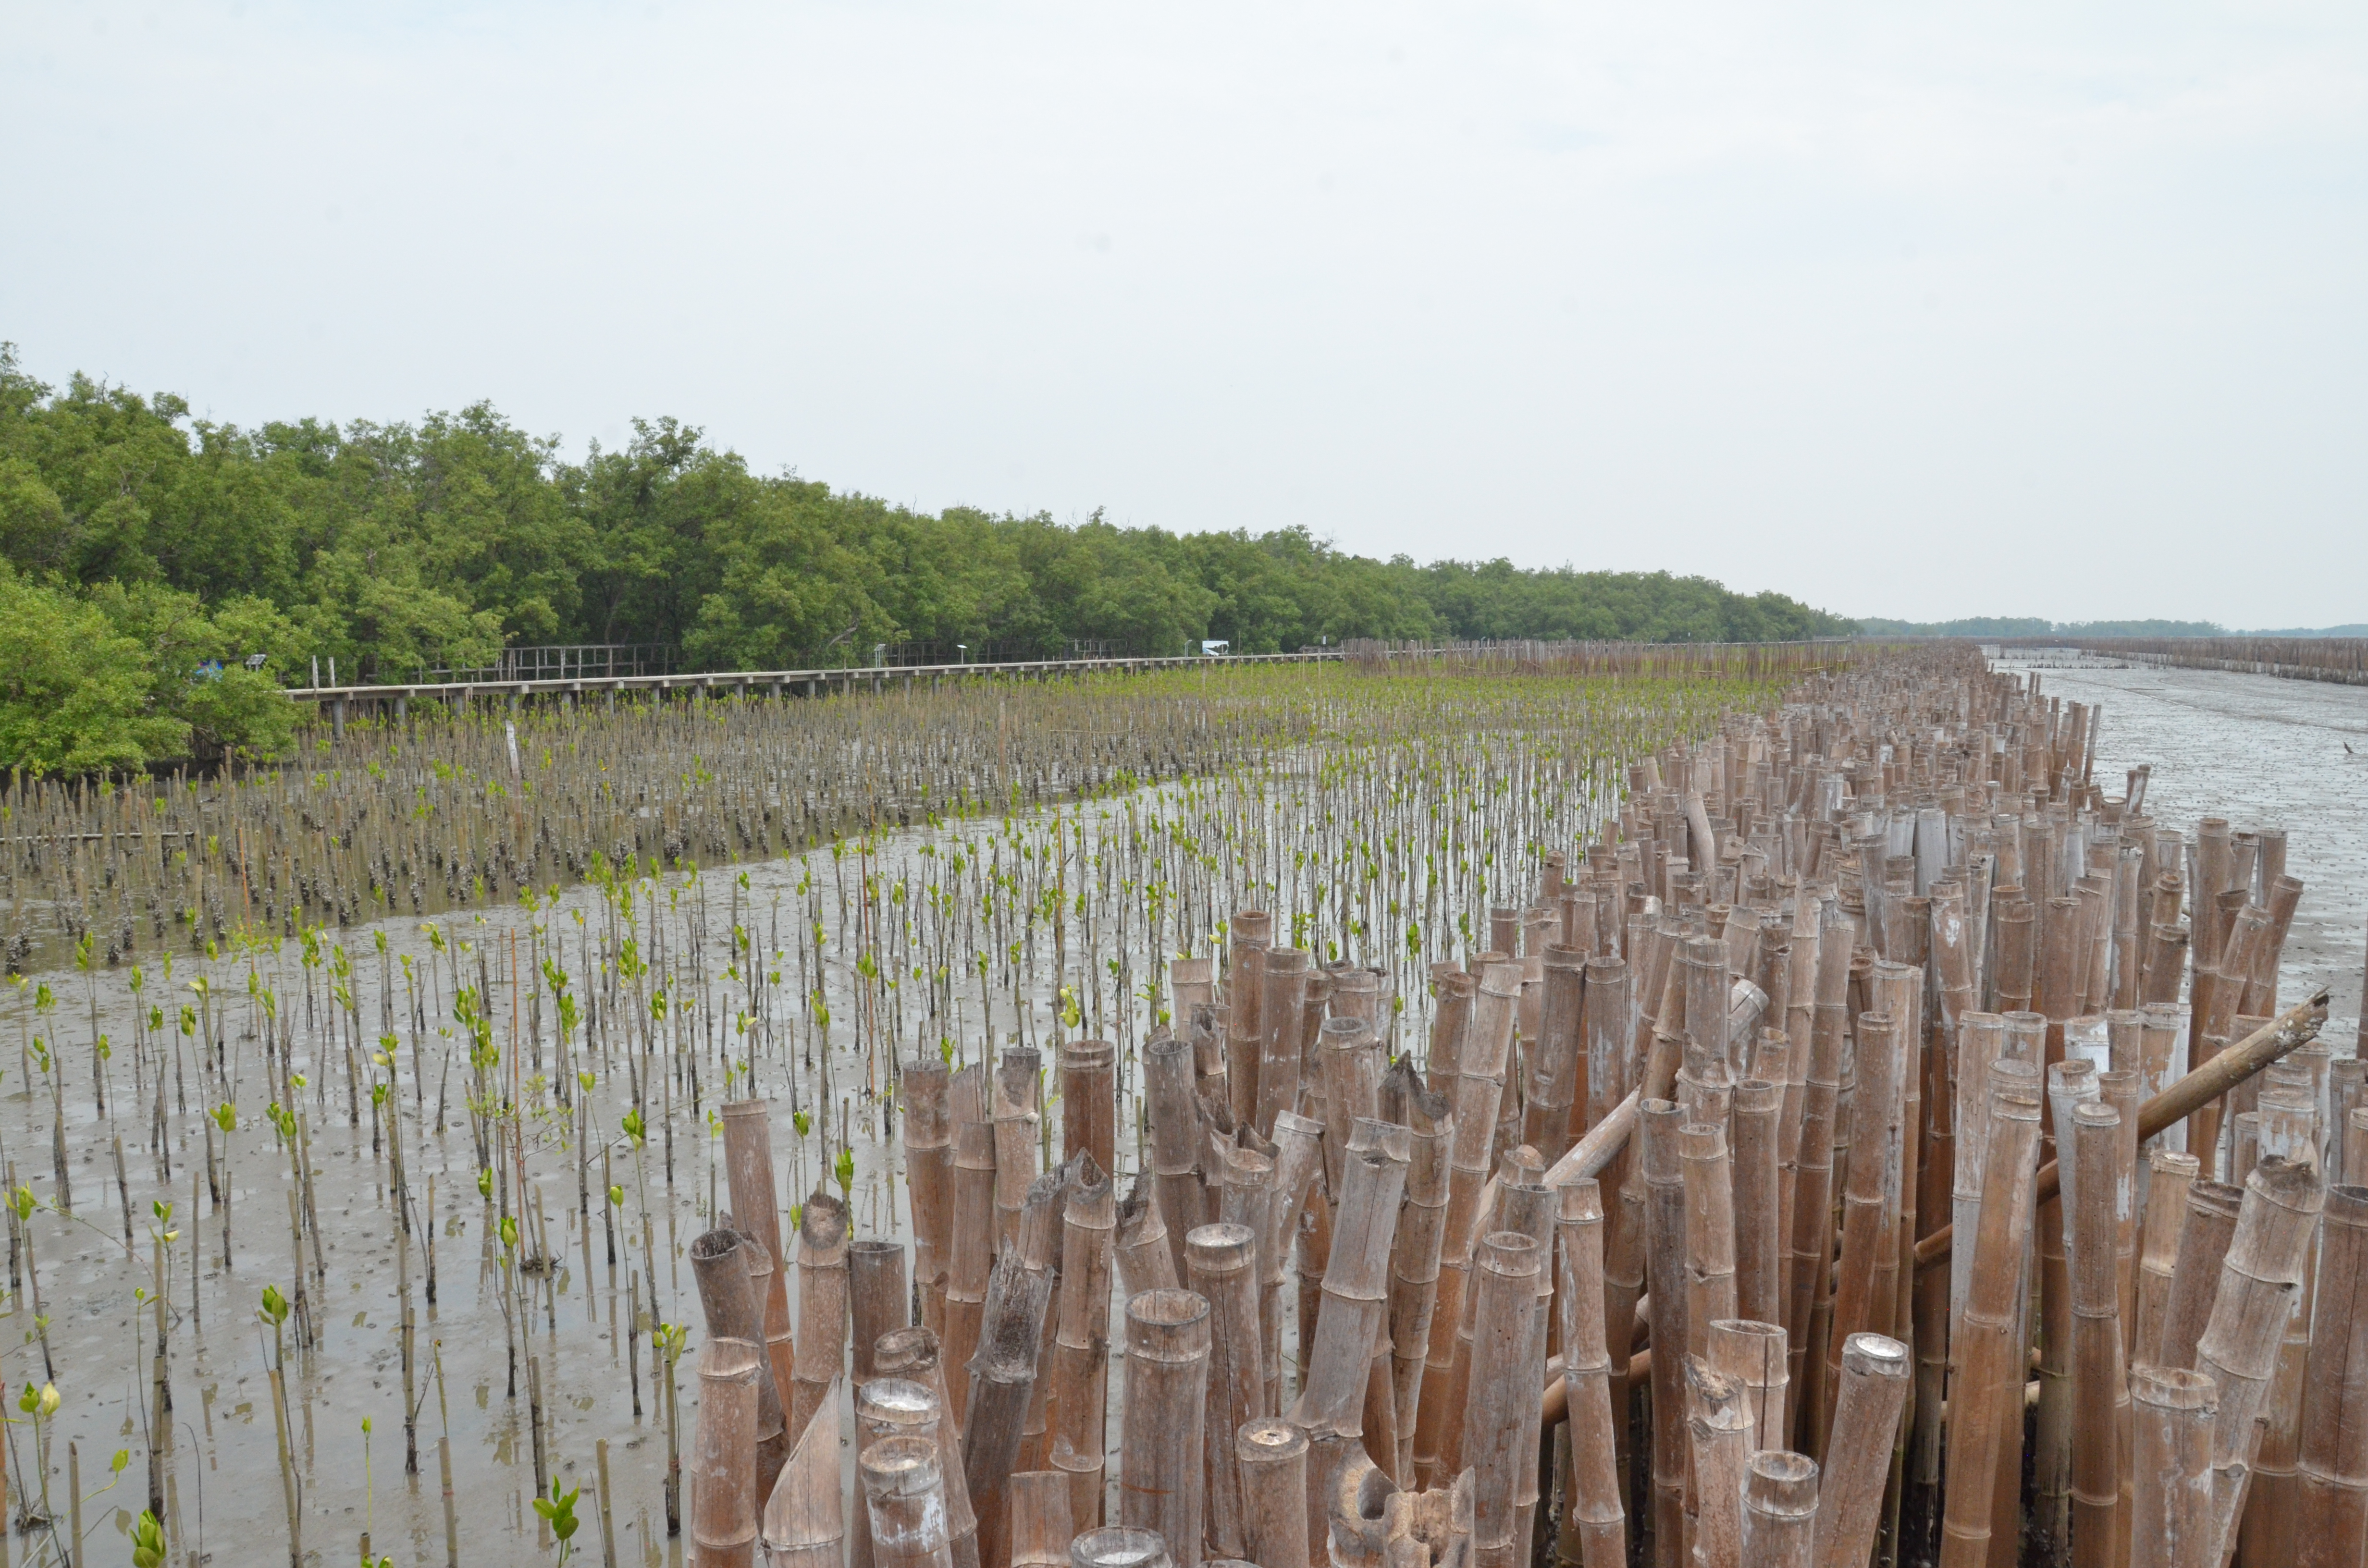 A bamboo wall protects mangrove saplings from the open sea